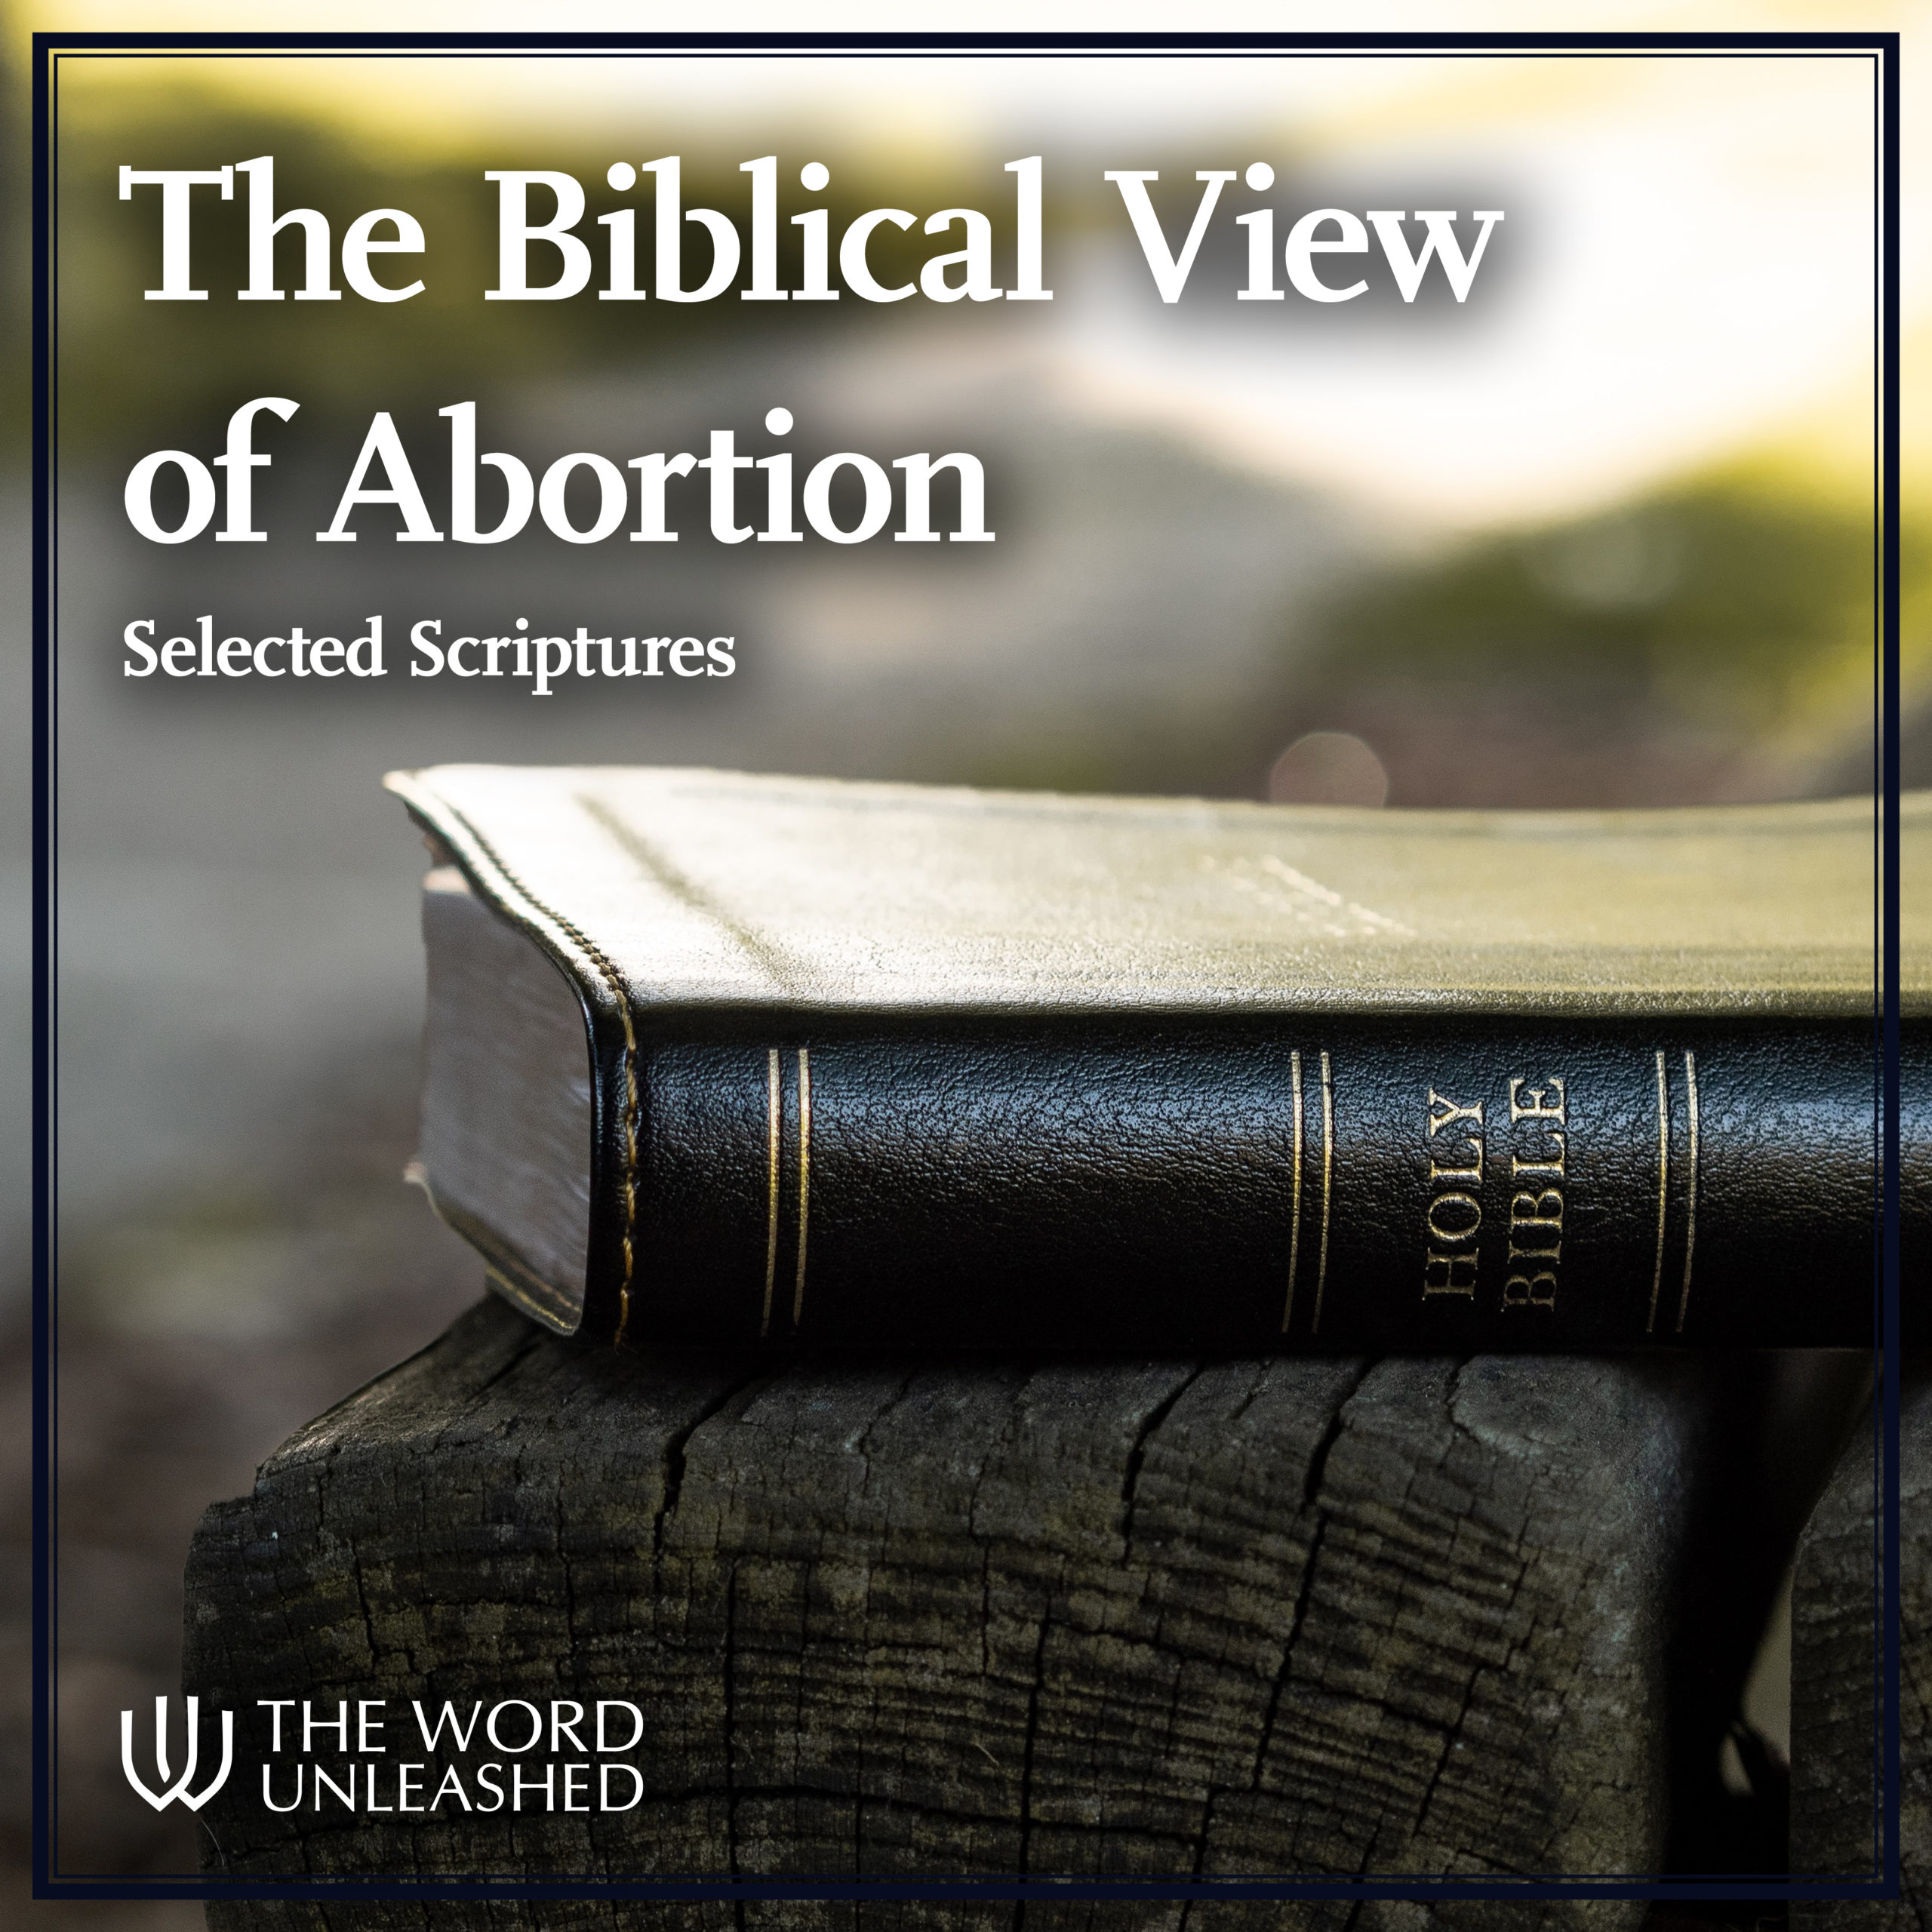 The Biblical View of Abortion